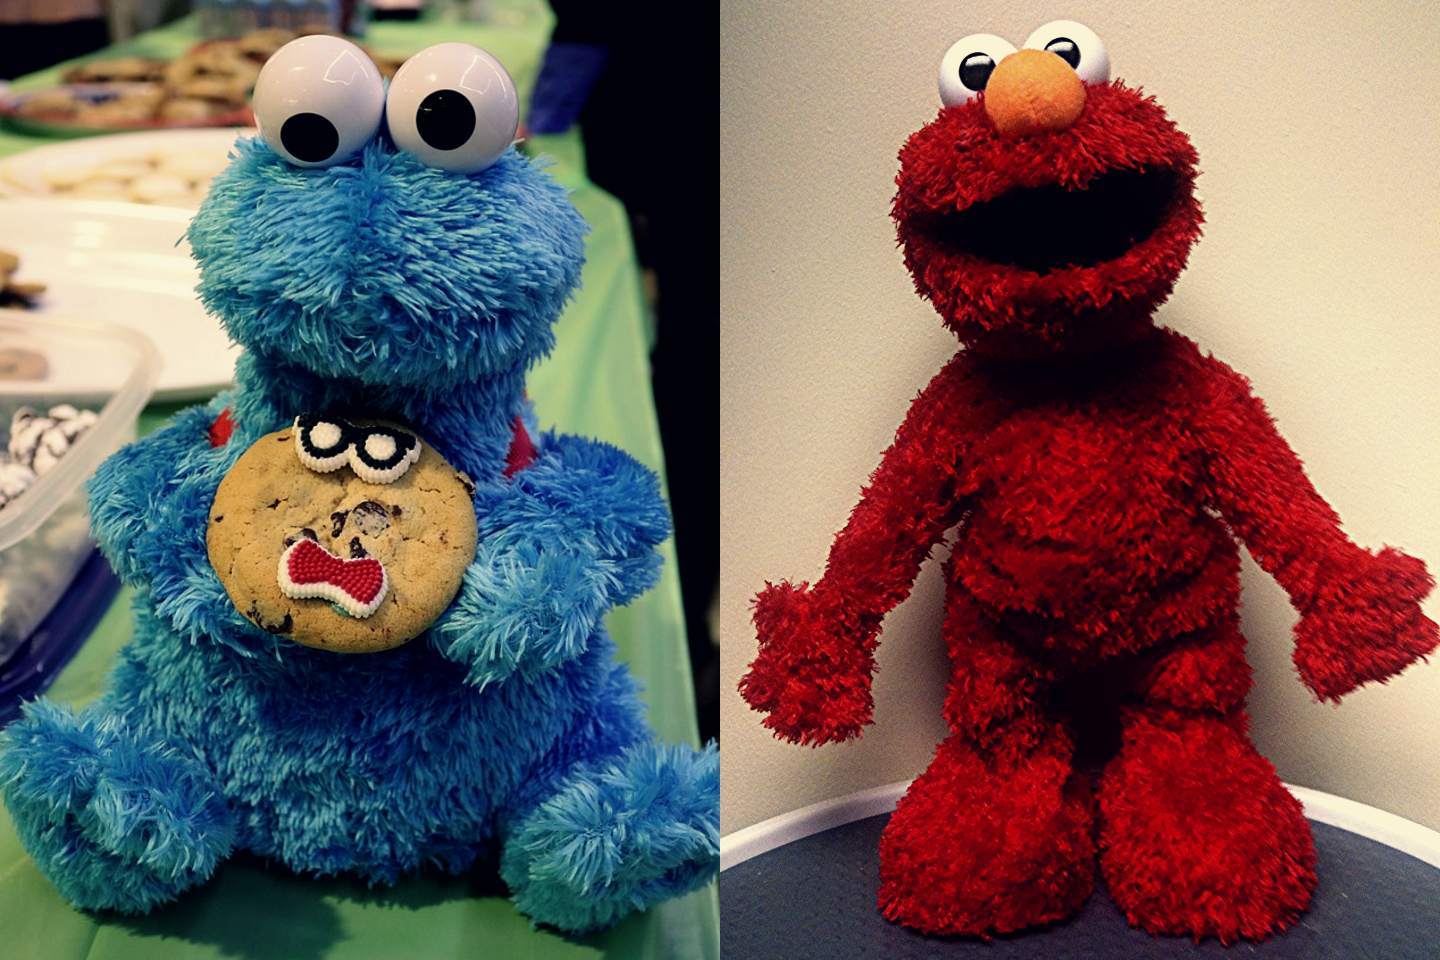 The Cookie Monster Doll And The Elmo Doll